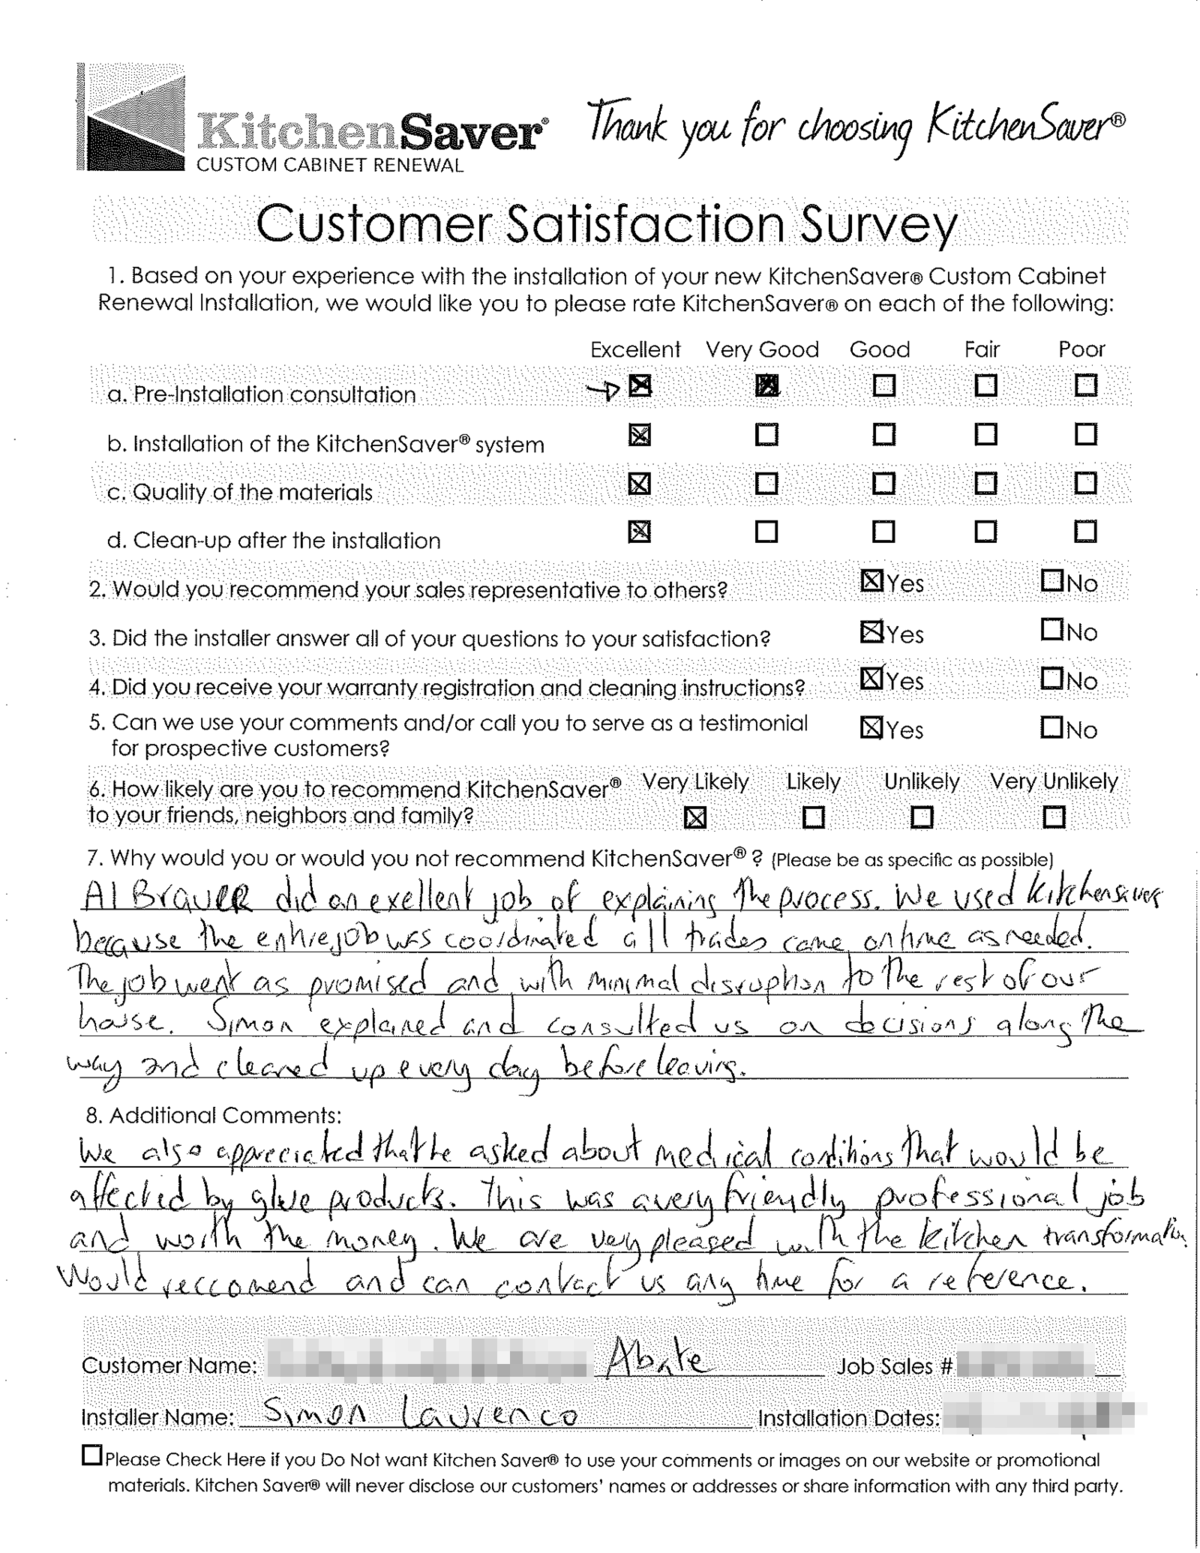  Abate Family Satisfaction Survey